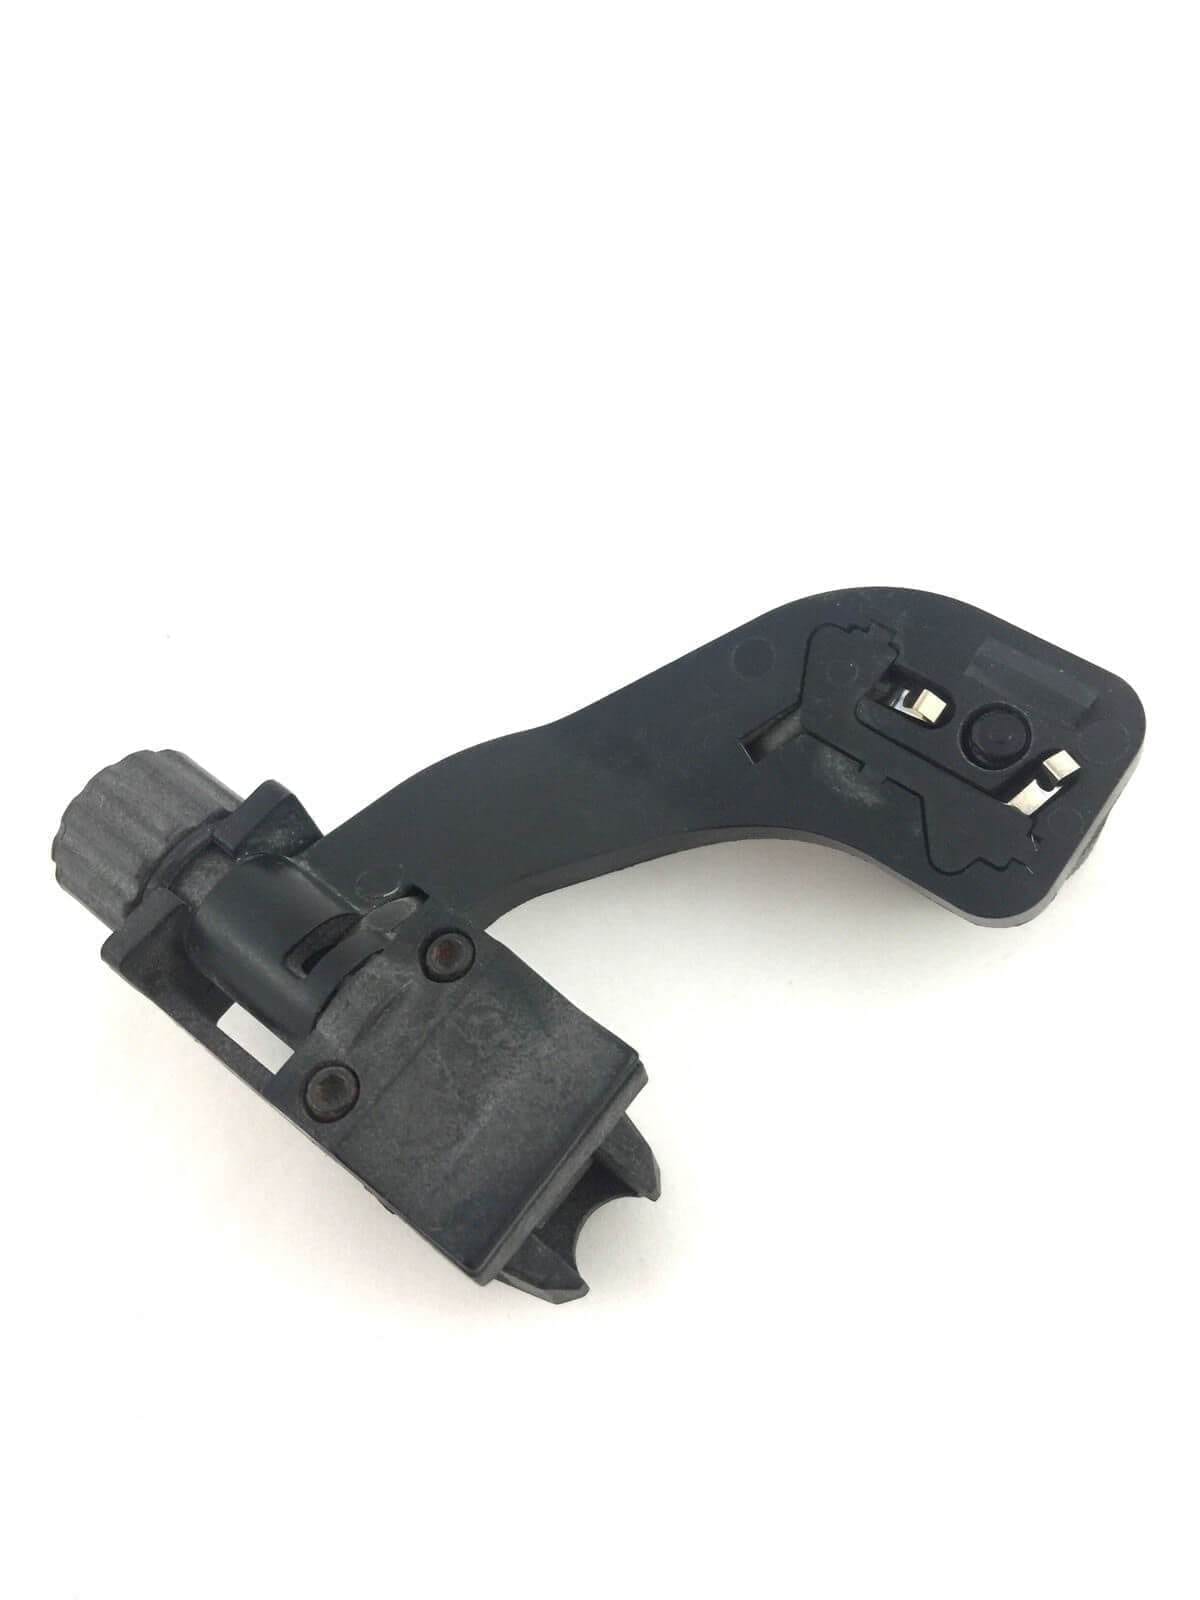 Details about   Plastic Tactical PVS NVG J Arm Mount Bracket for Night Vision Goggles 